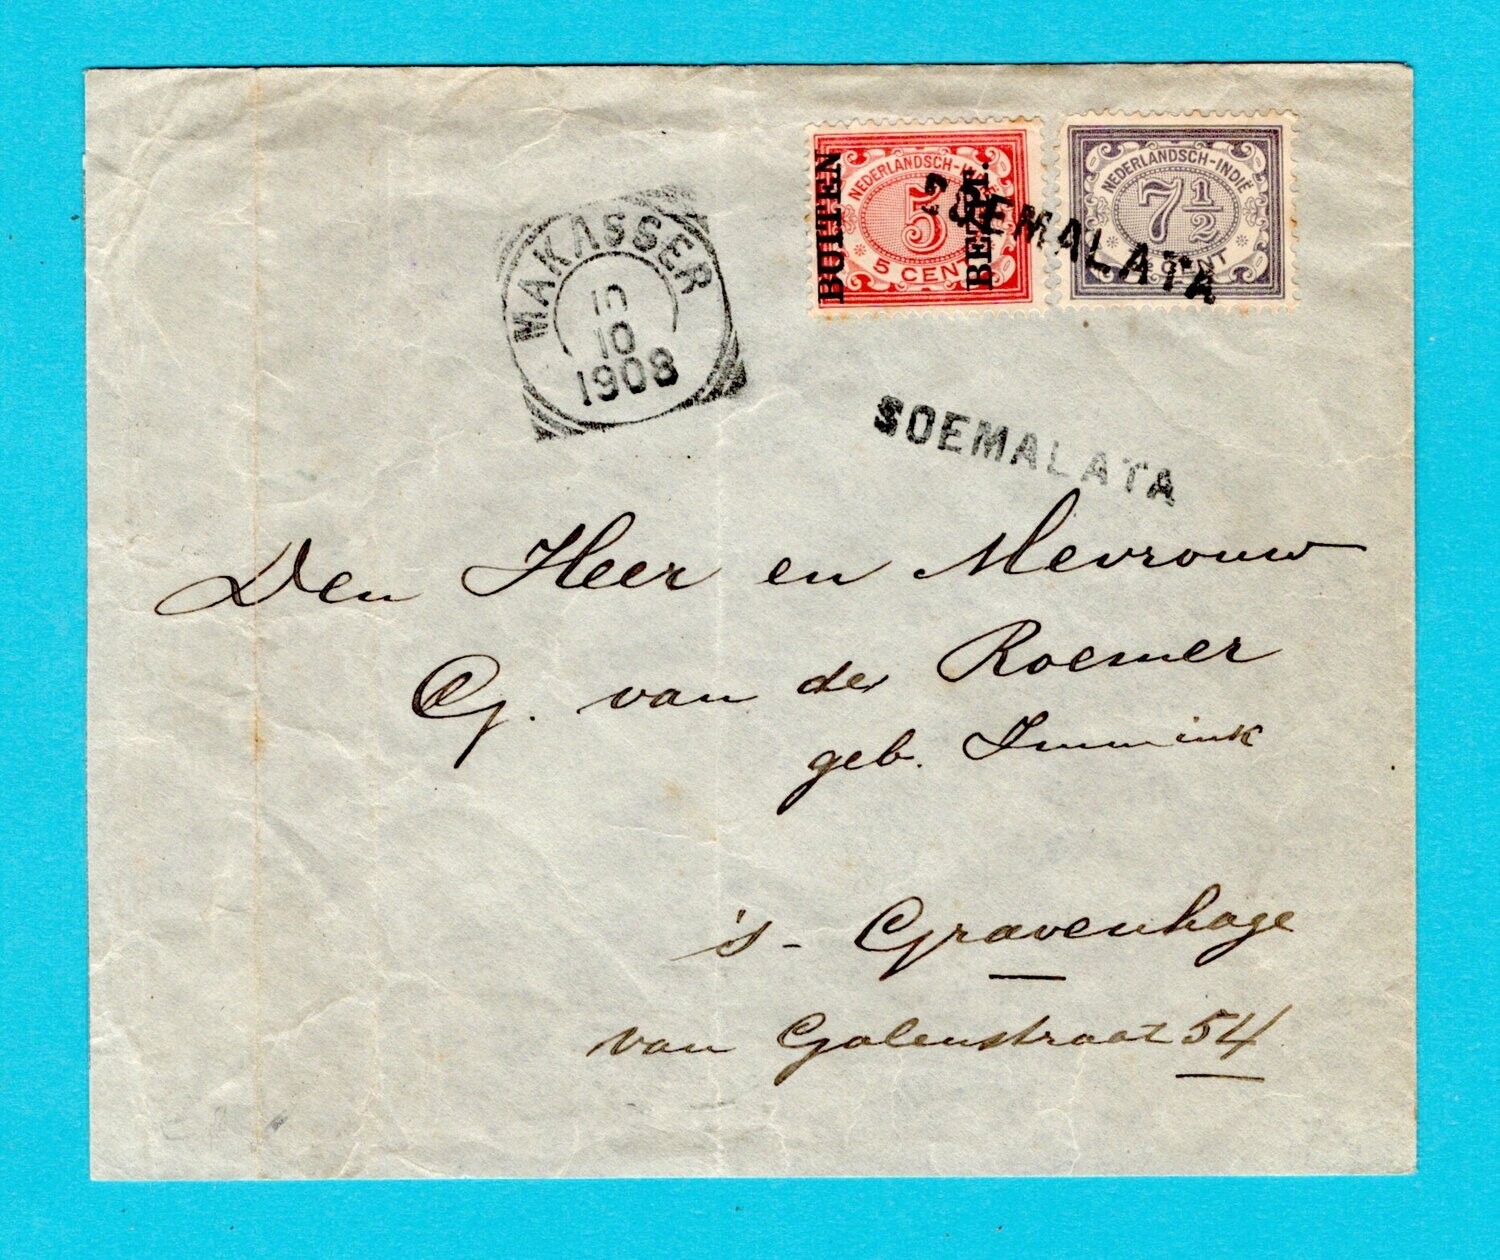 NETHERLANDS EAST INDIES cover 1908 Soemalata to The Hague